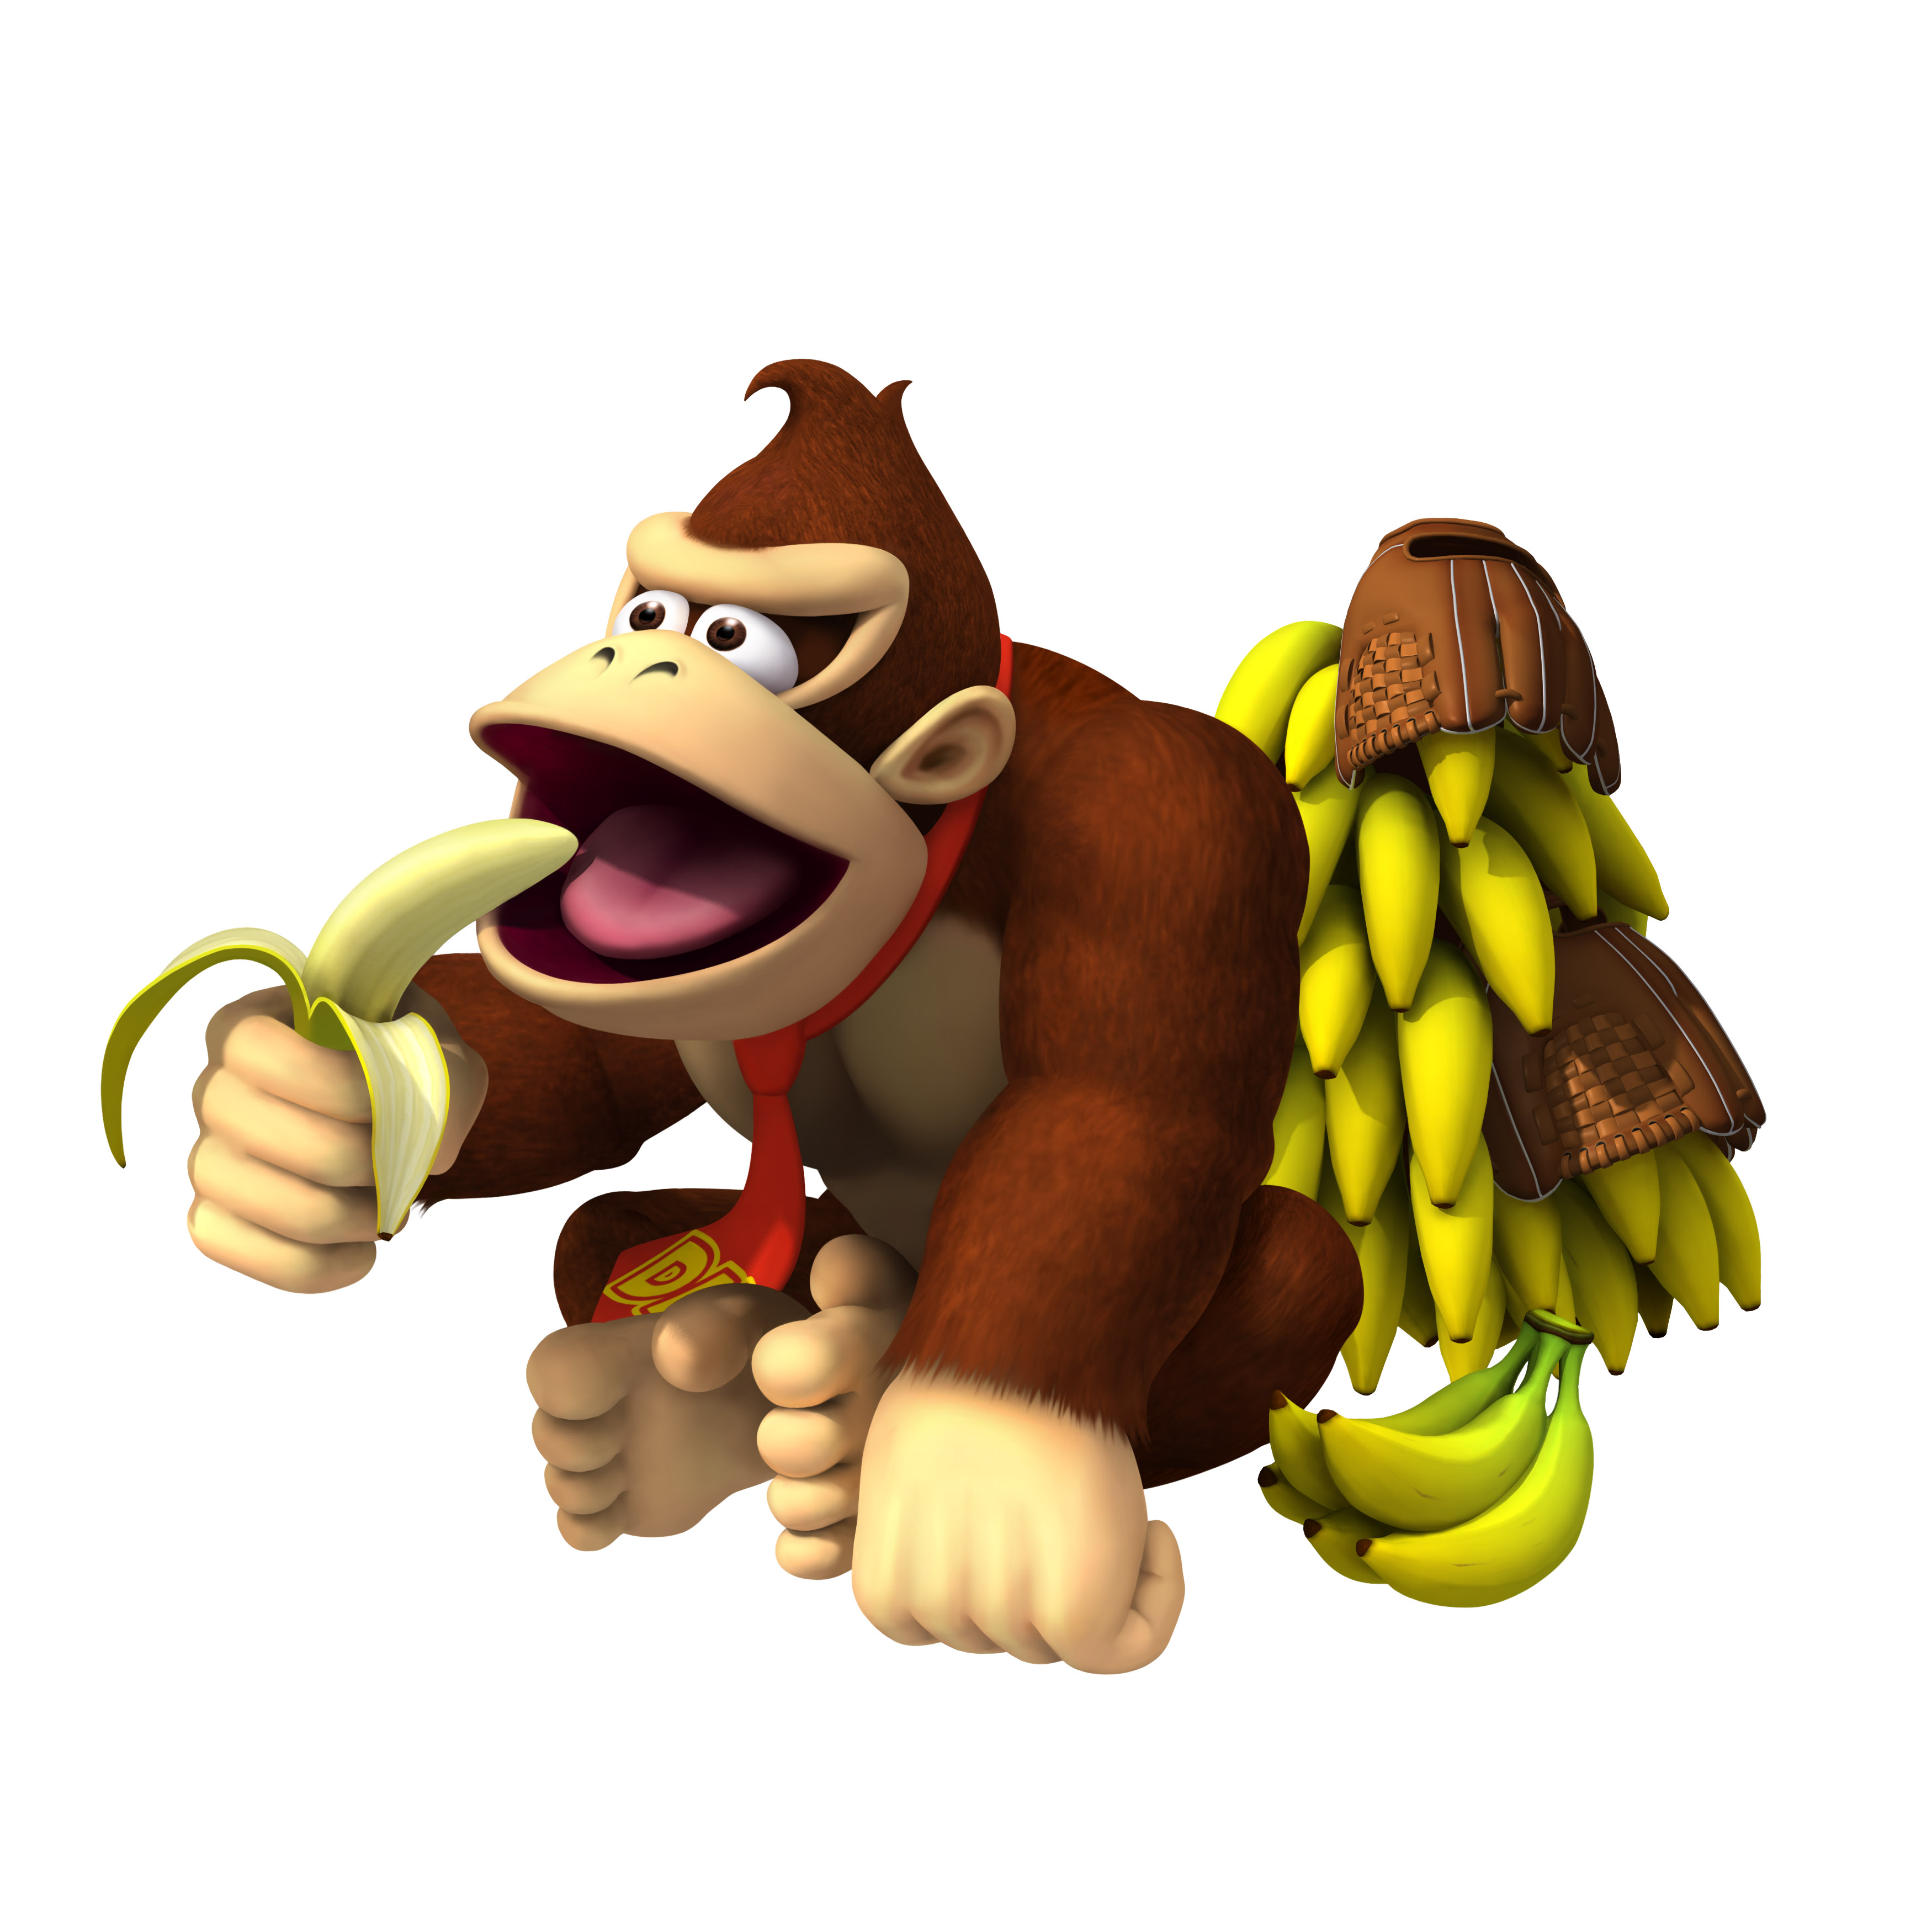 15 Quality Donkey Kong Wallpapers, Video Games